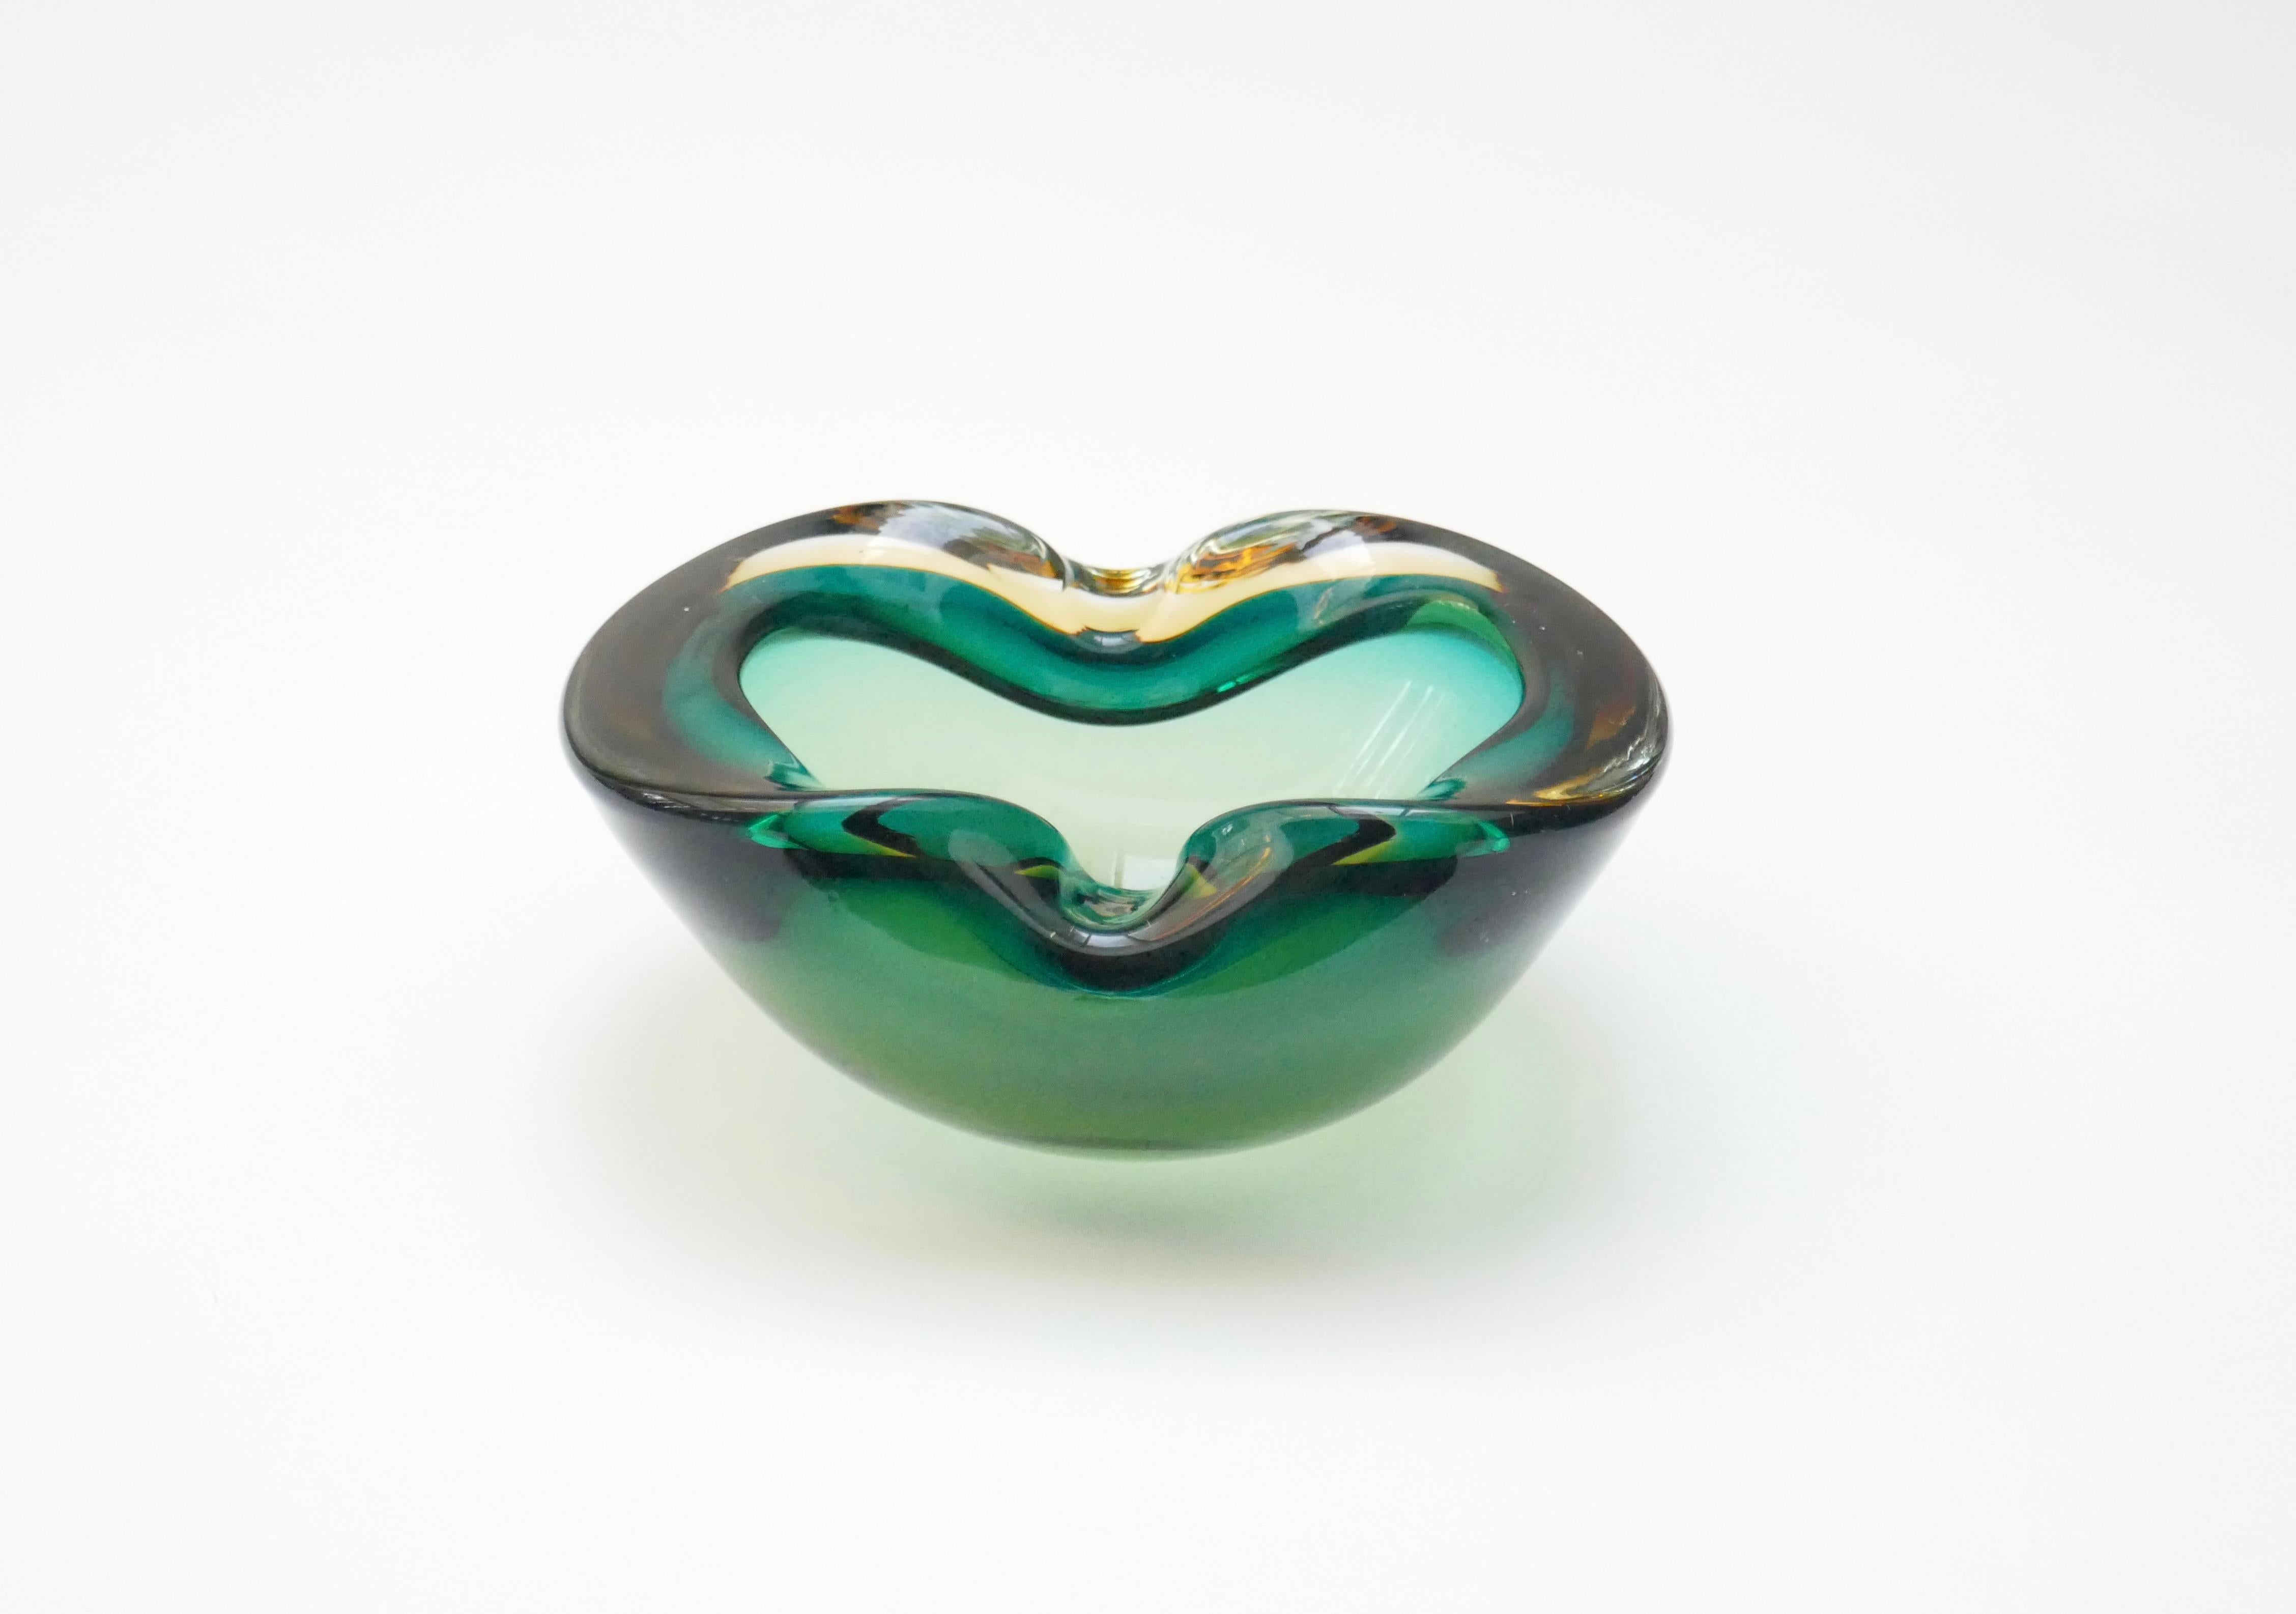 Sommerso free form art glass bowl / ashtray
Stunning handblown glass bowl with organic free form design in green glass.
It has an amber glass rim .
To be used as decorative bowl, vide-poche or rings bowl. Also interesting for hand soap dish and